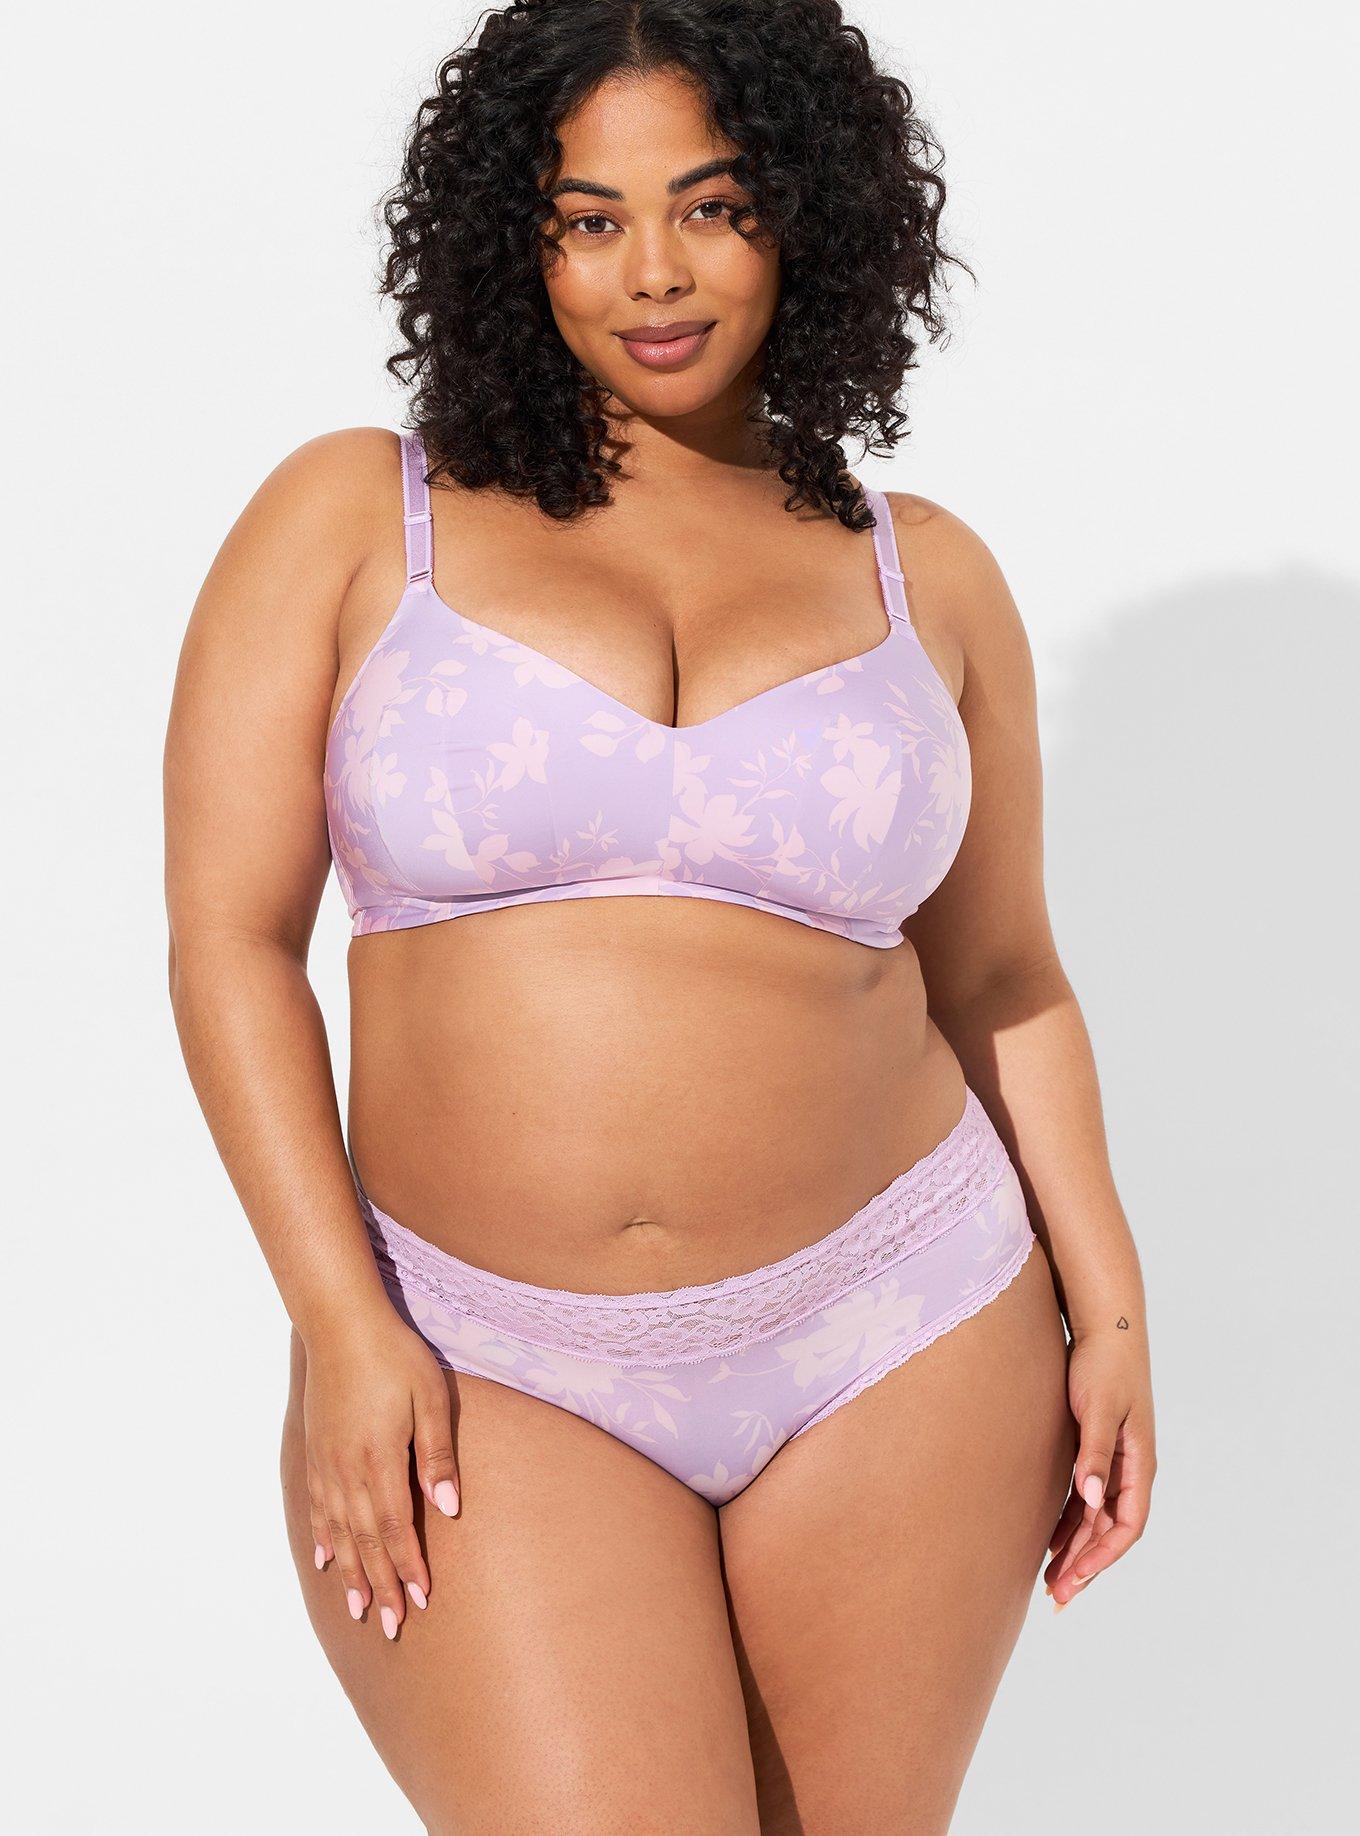 Plus Size - Second Skin Mid-Rise Hipster Panty - Torrid